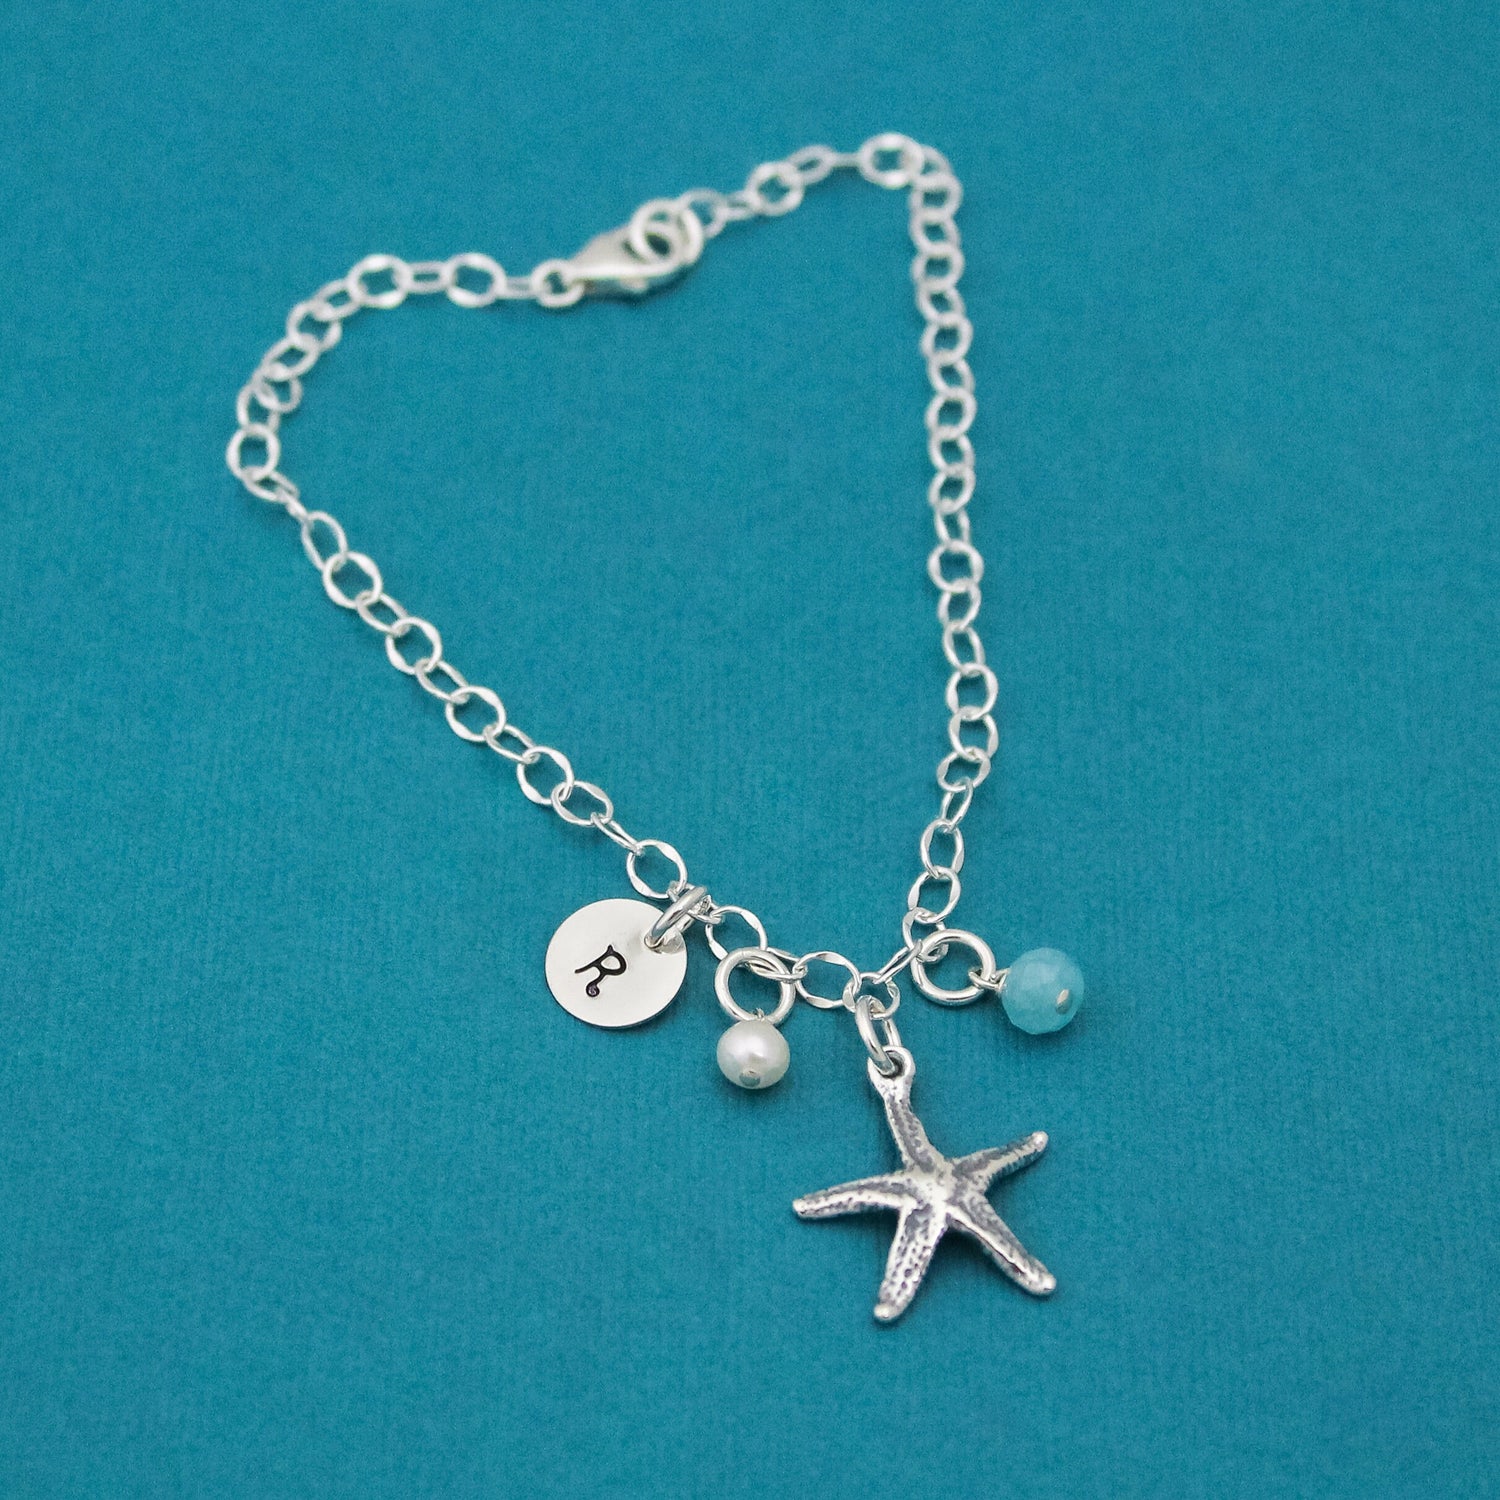 Personalized Starfish Anklet, Initial, Birthstone, silver Starfish anklet, ankle bracelet, Summer jewelry , beach wedding